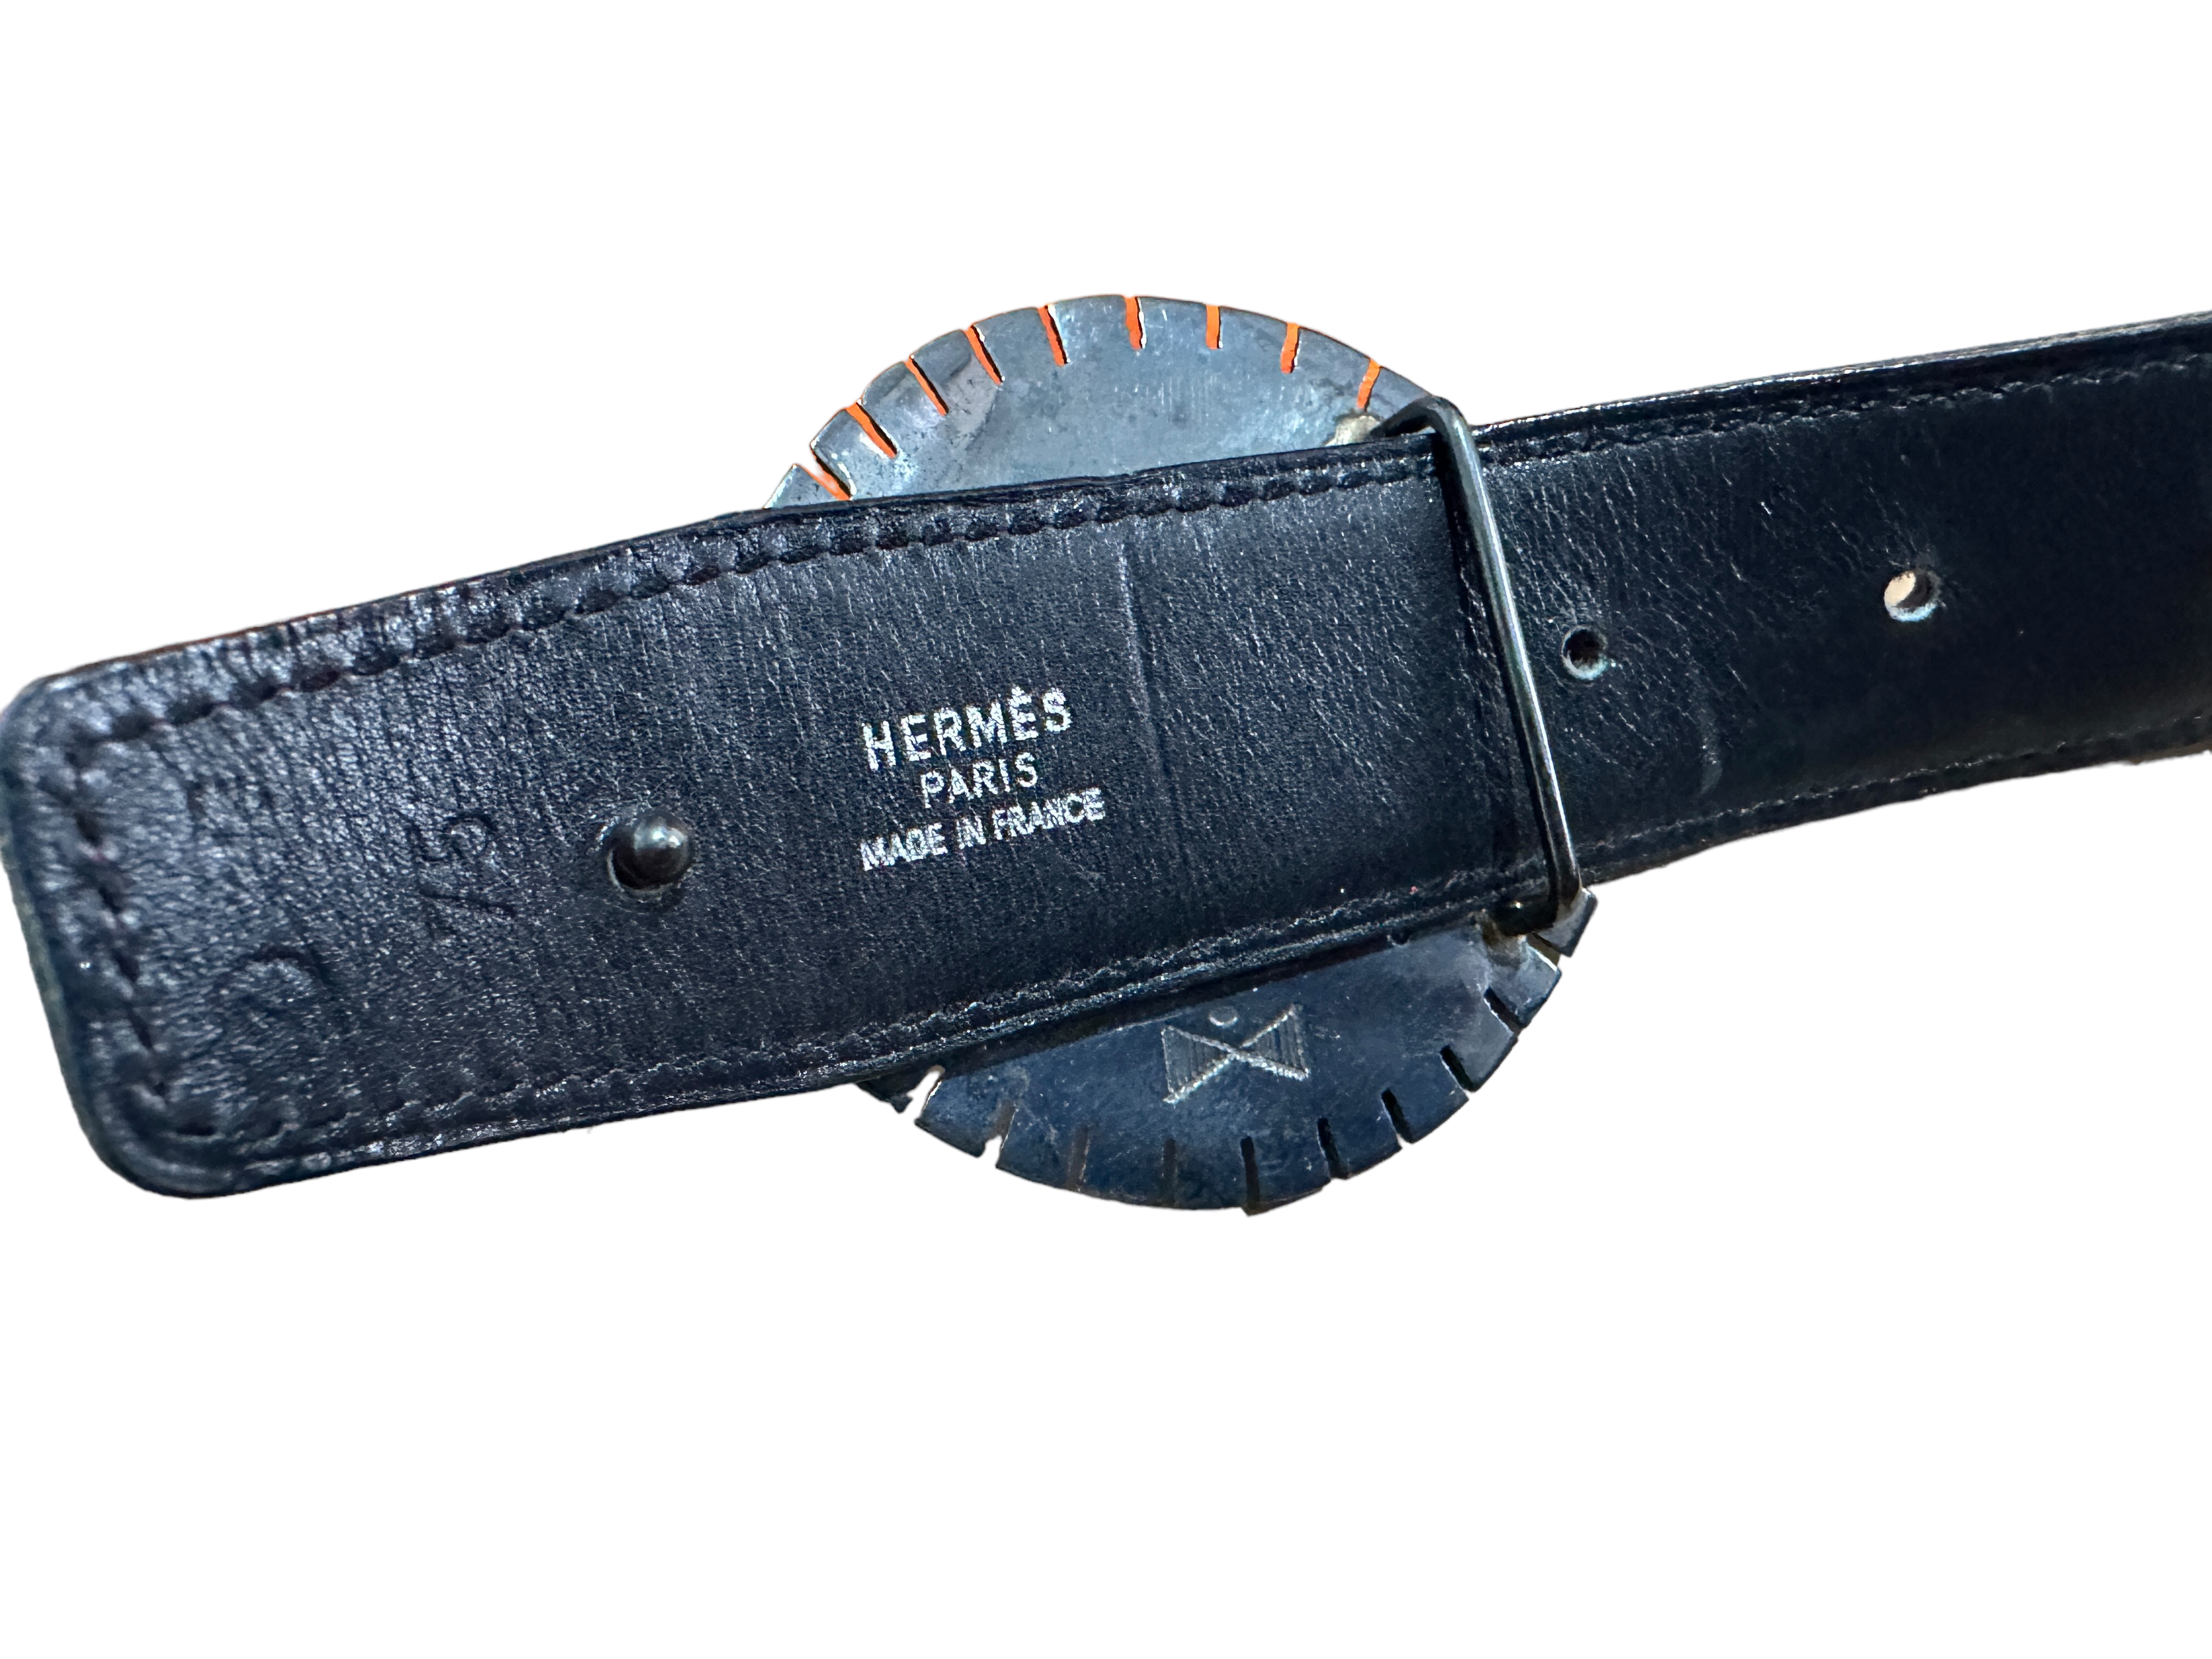 Vintage Bagged Hermes Leather Belt - 33 3/4" long-vendor states that Buckle is a one off. - Image 3 of 9